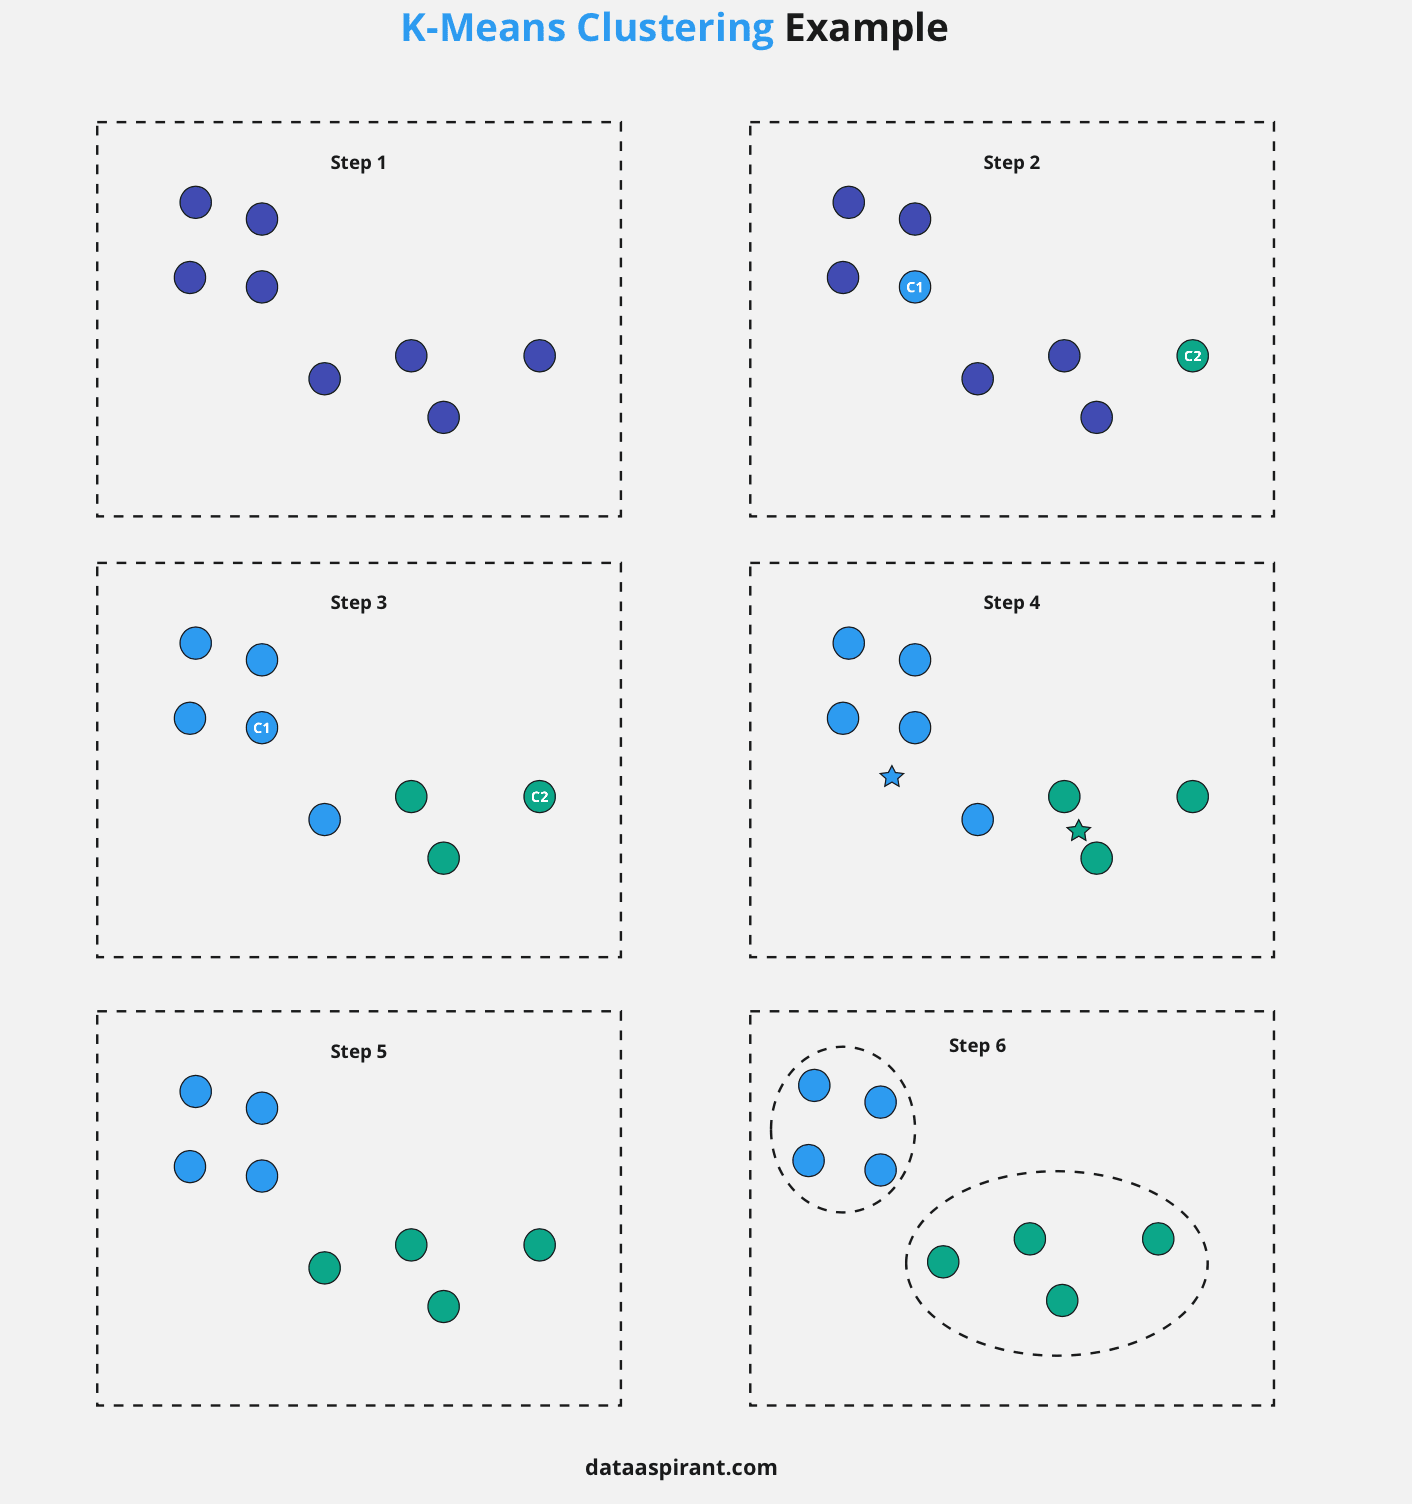 K-means Clustering Example